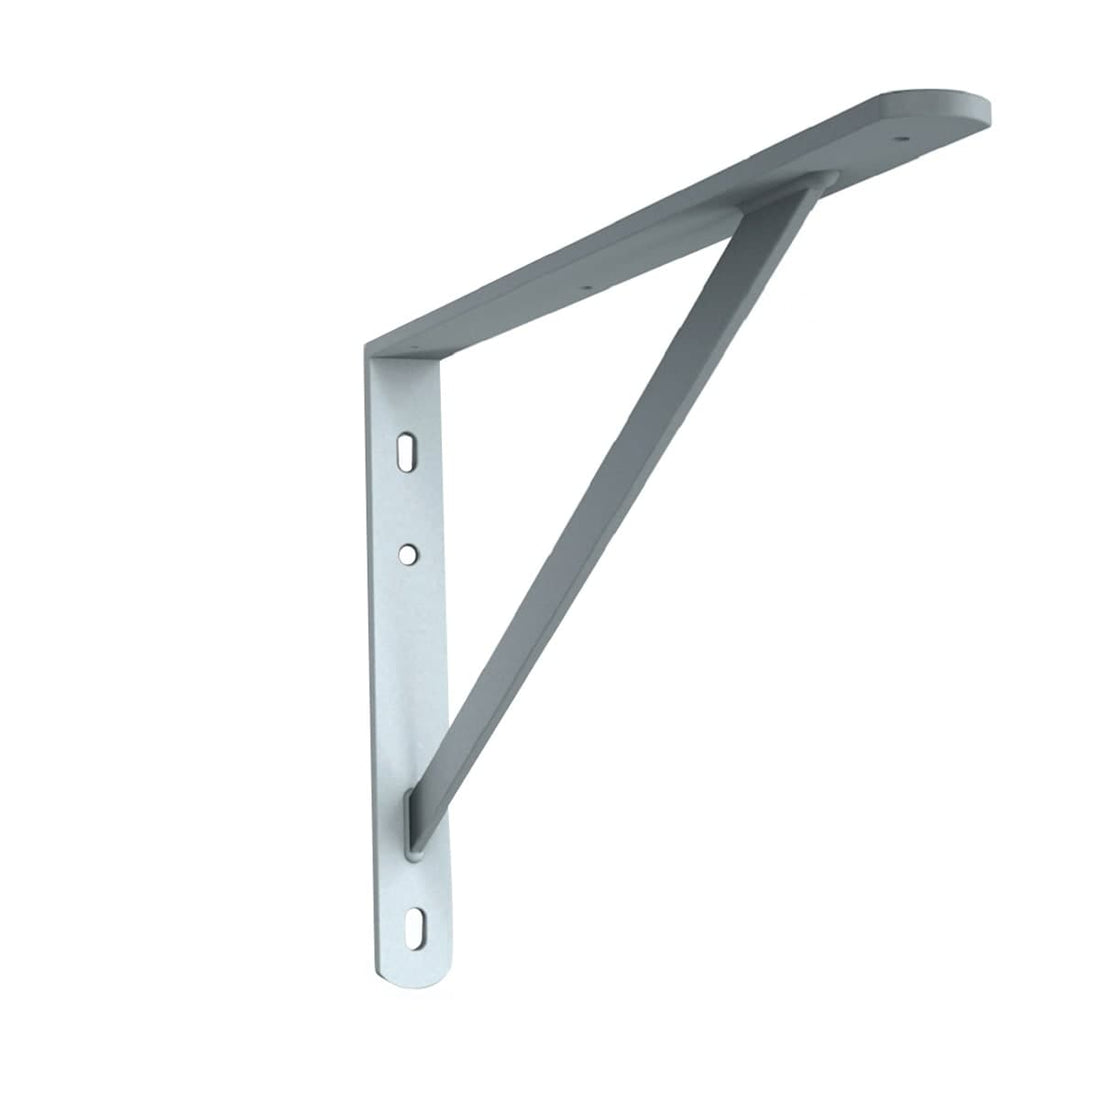 OBELIX SIDDLE RAIL SUPPORT D50xH31CM CARRYING 50KG IN GALVANIZED METAL - best price from Maltashopper.com BR410500227